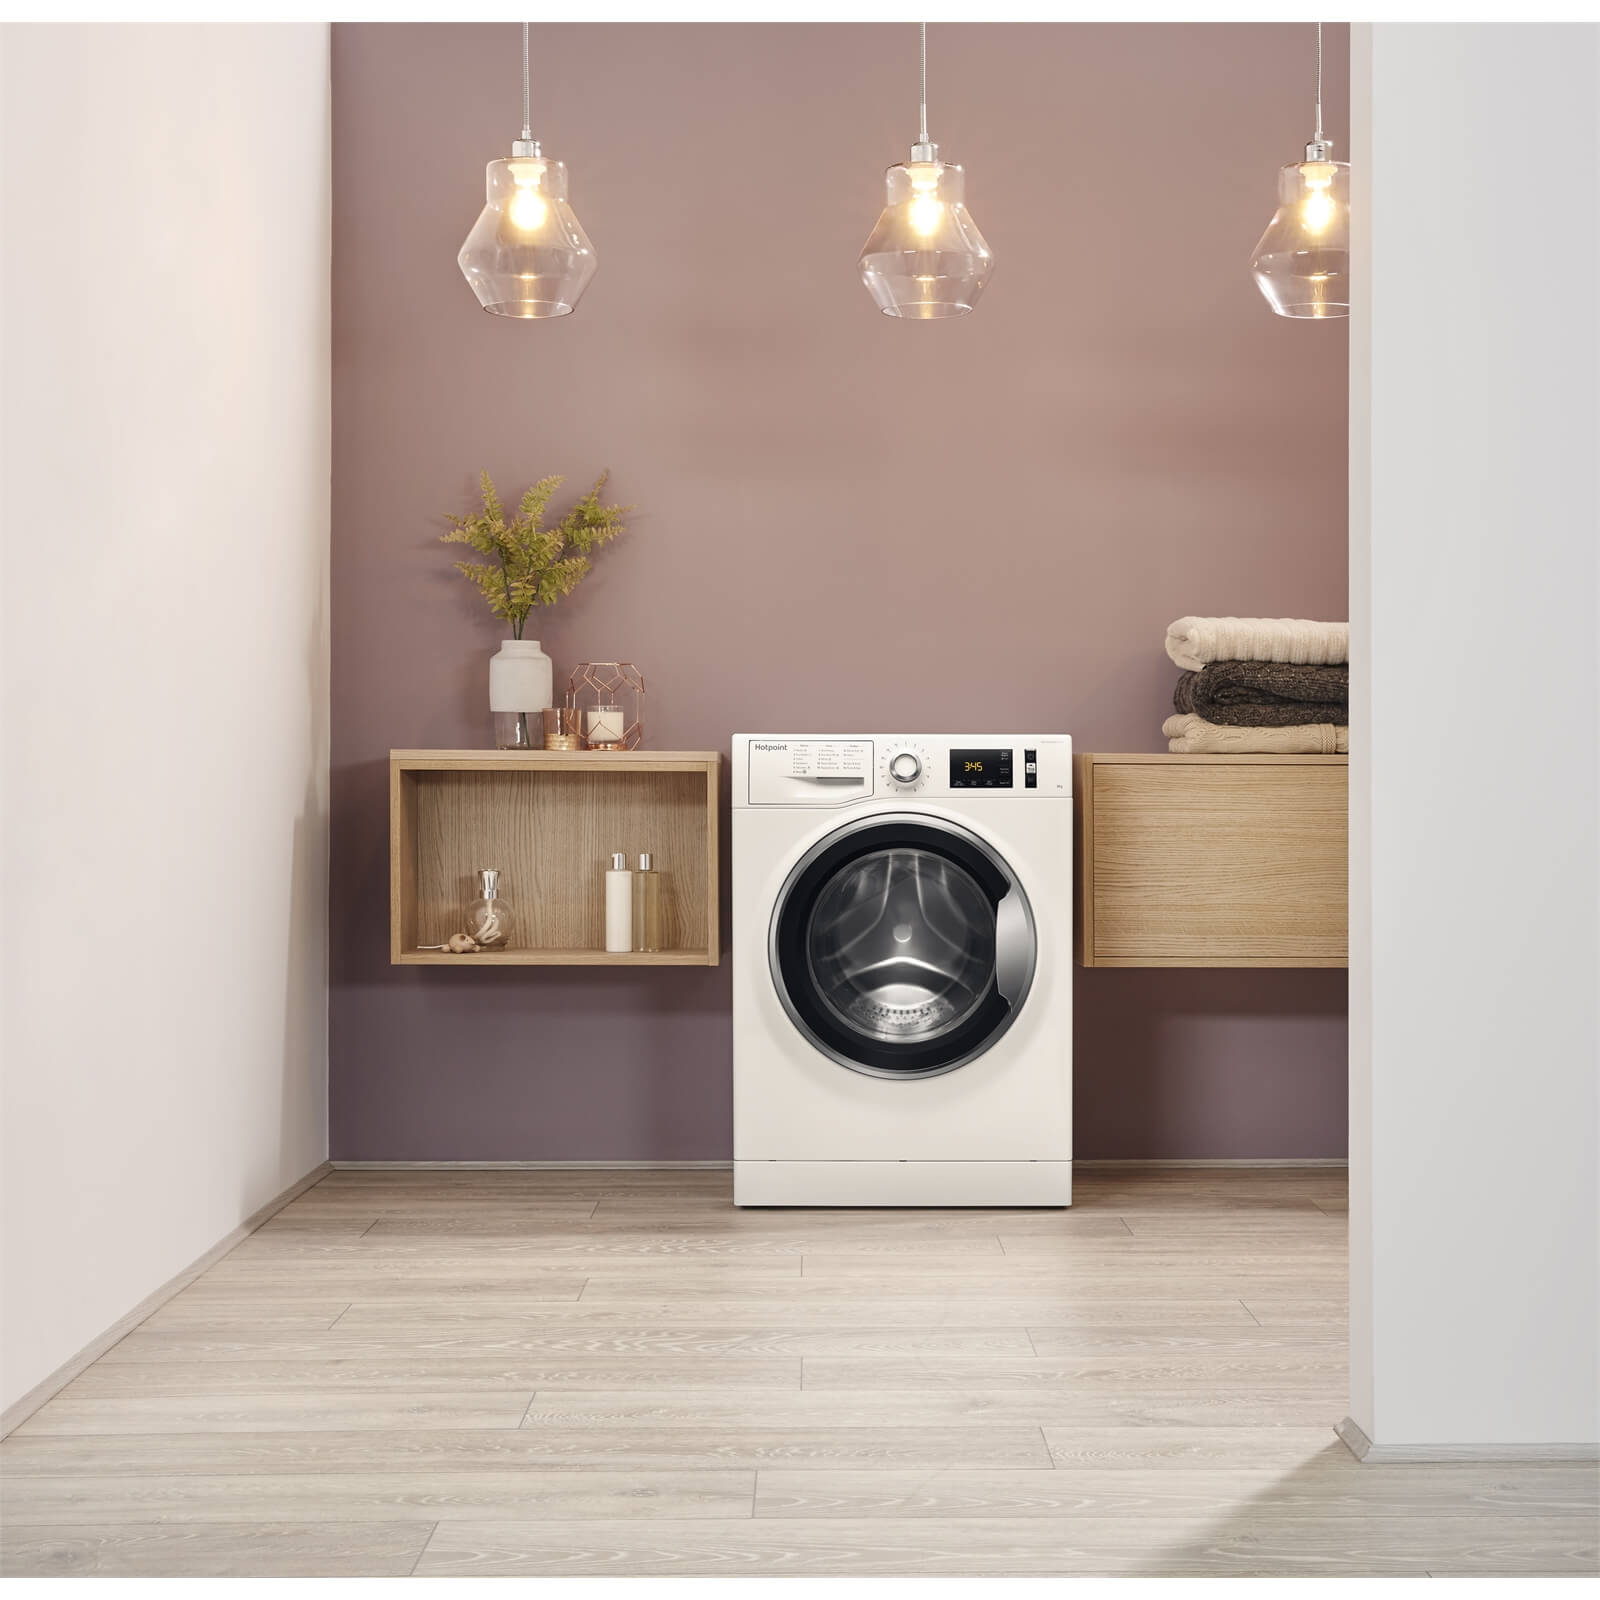 Hotpoint ActiveCare NM11 946 WC A Washing Machine - White